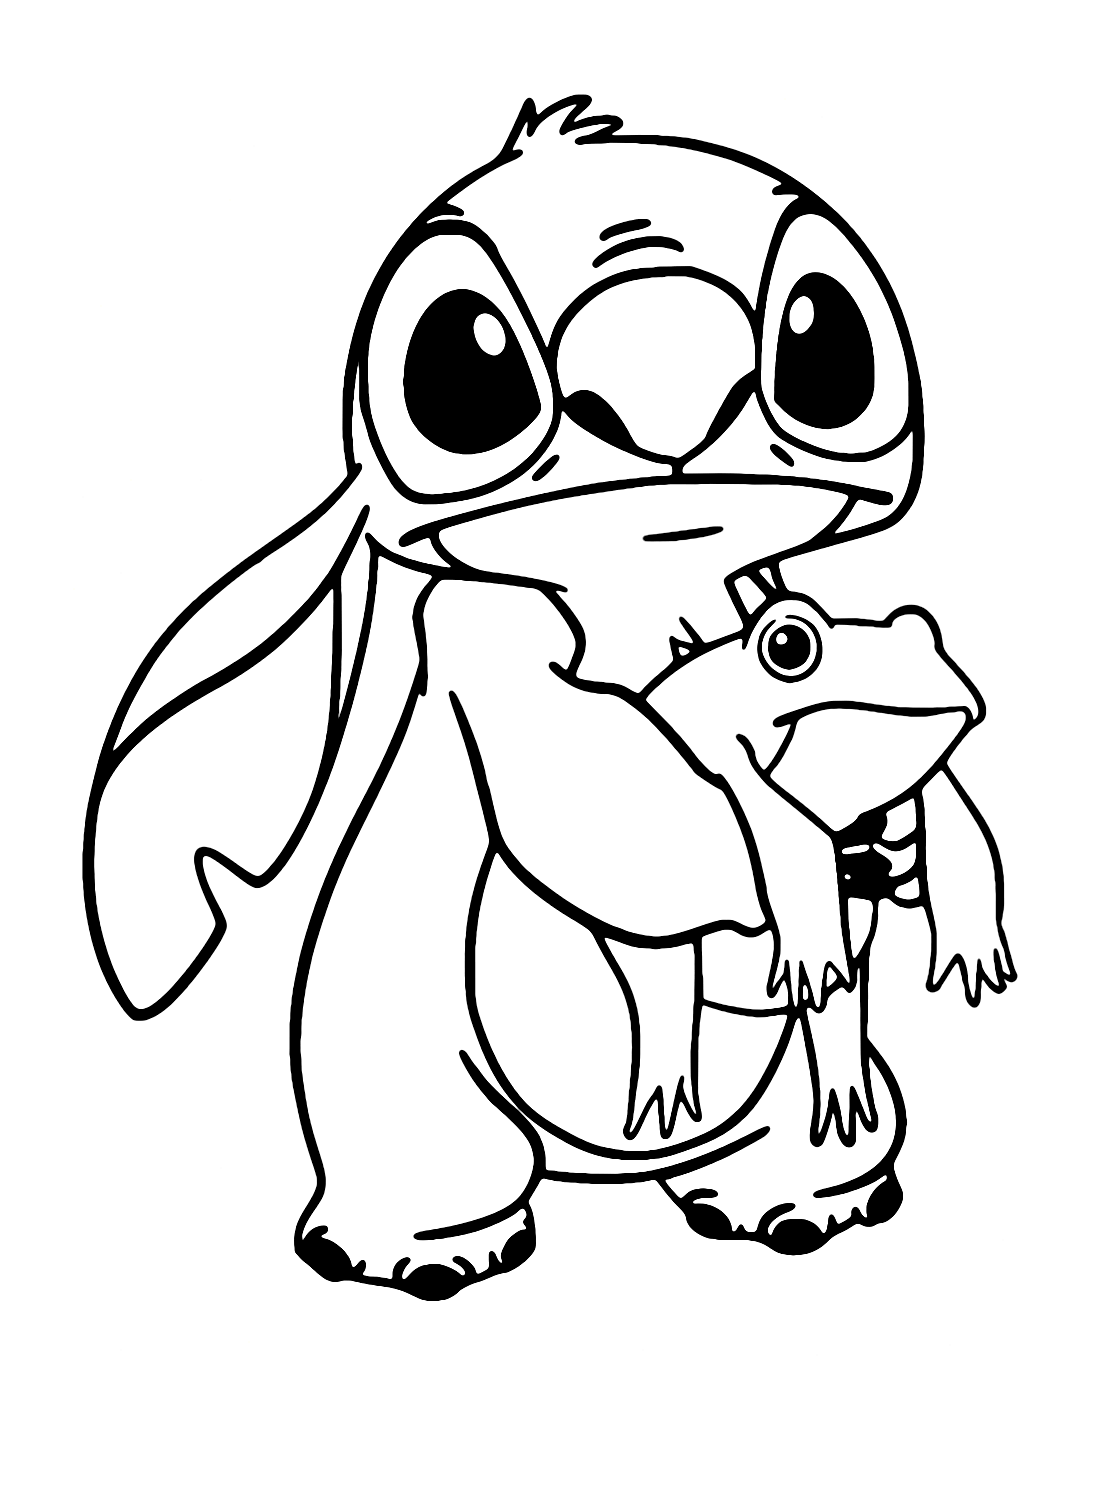 Stitch Coloring Pages Free Coloring Page